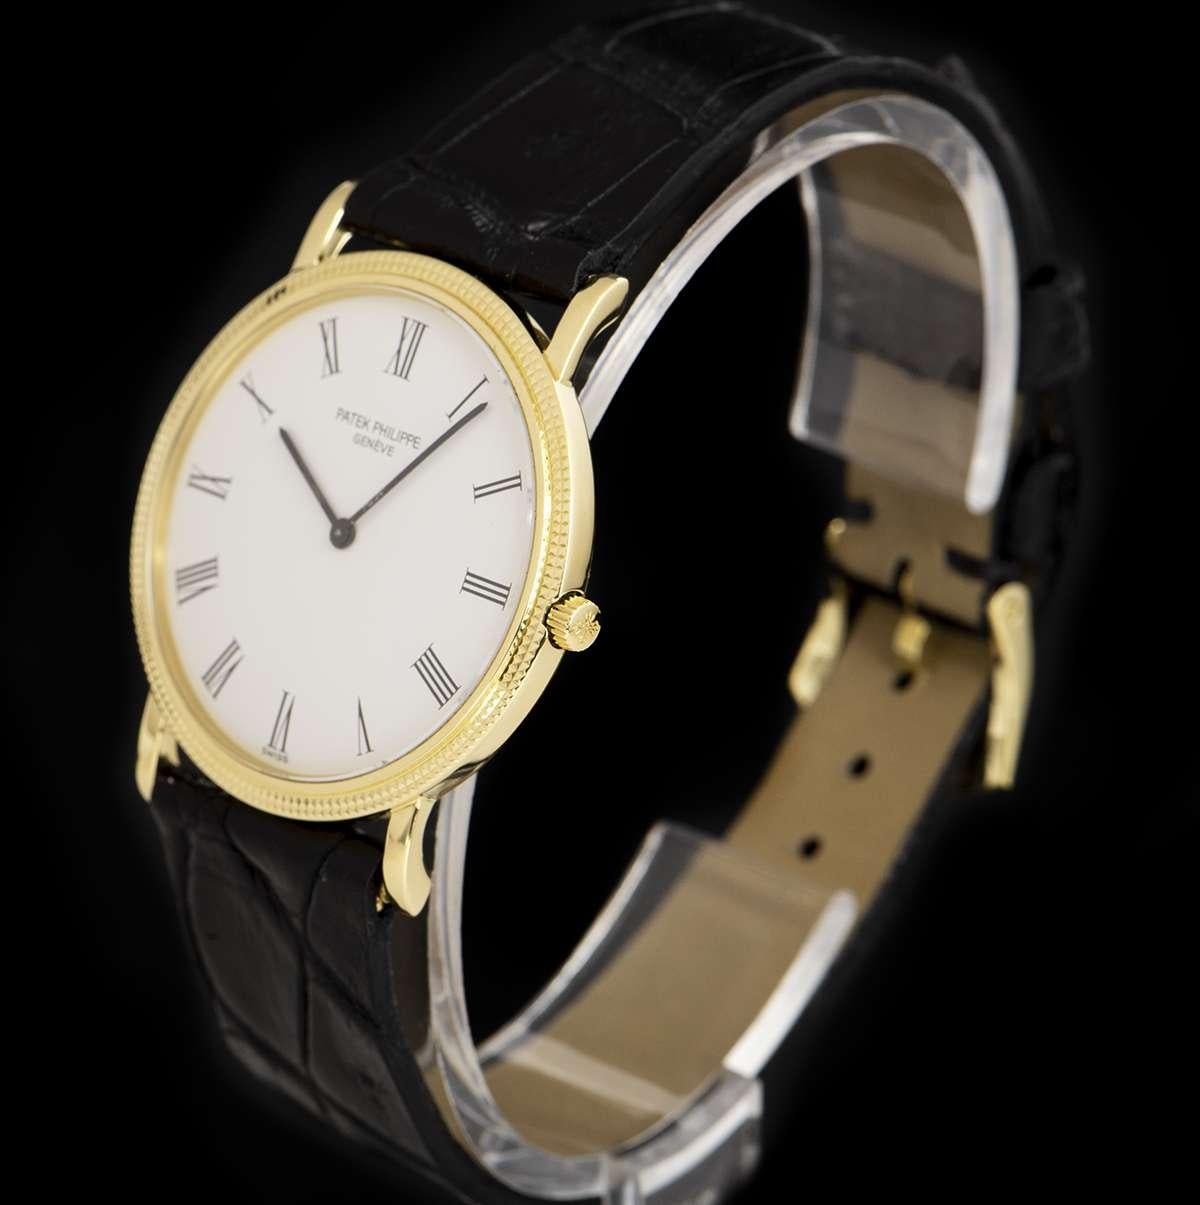 An 18k Yellow Gold Calatrava Gents Wristwatch, white dial with roman numerals, a fixed 18k yellow gold hobnail patterned bezel, an original black leather strap with an original 18k yellow gold pin buckle, sapphire glass, manual wind movement, in